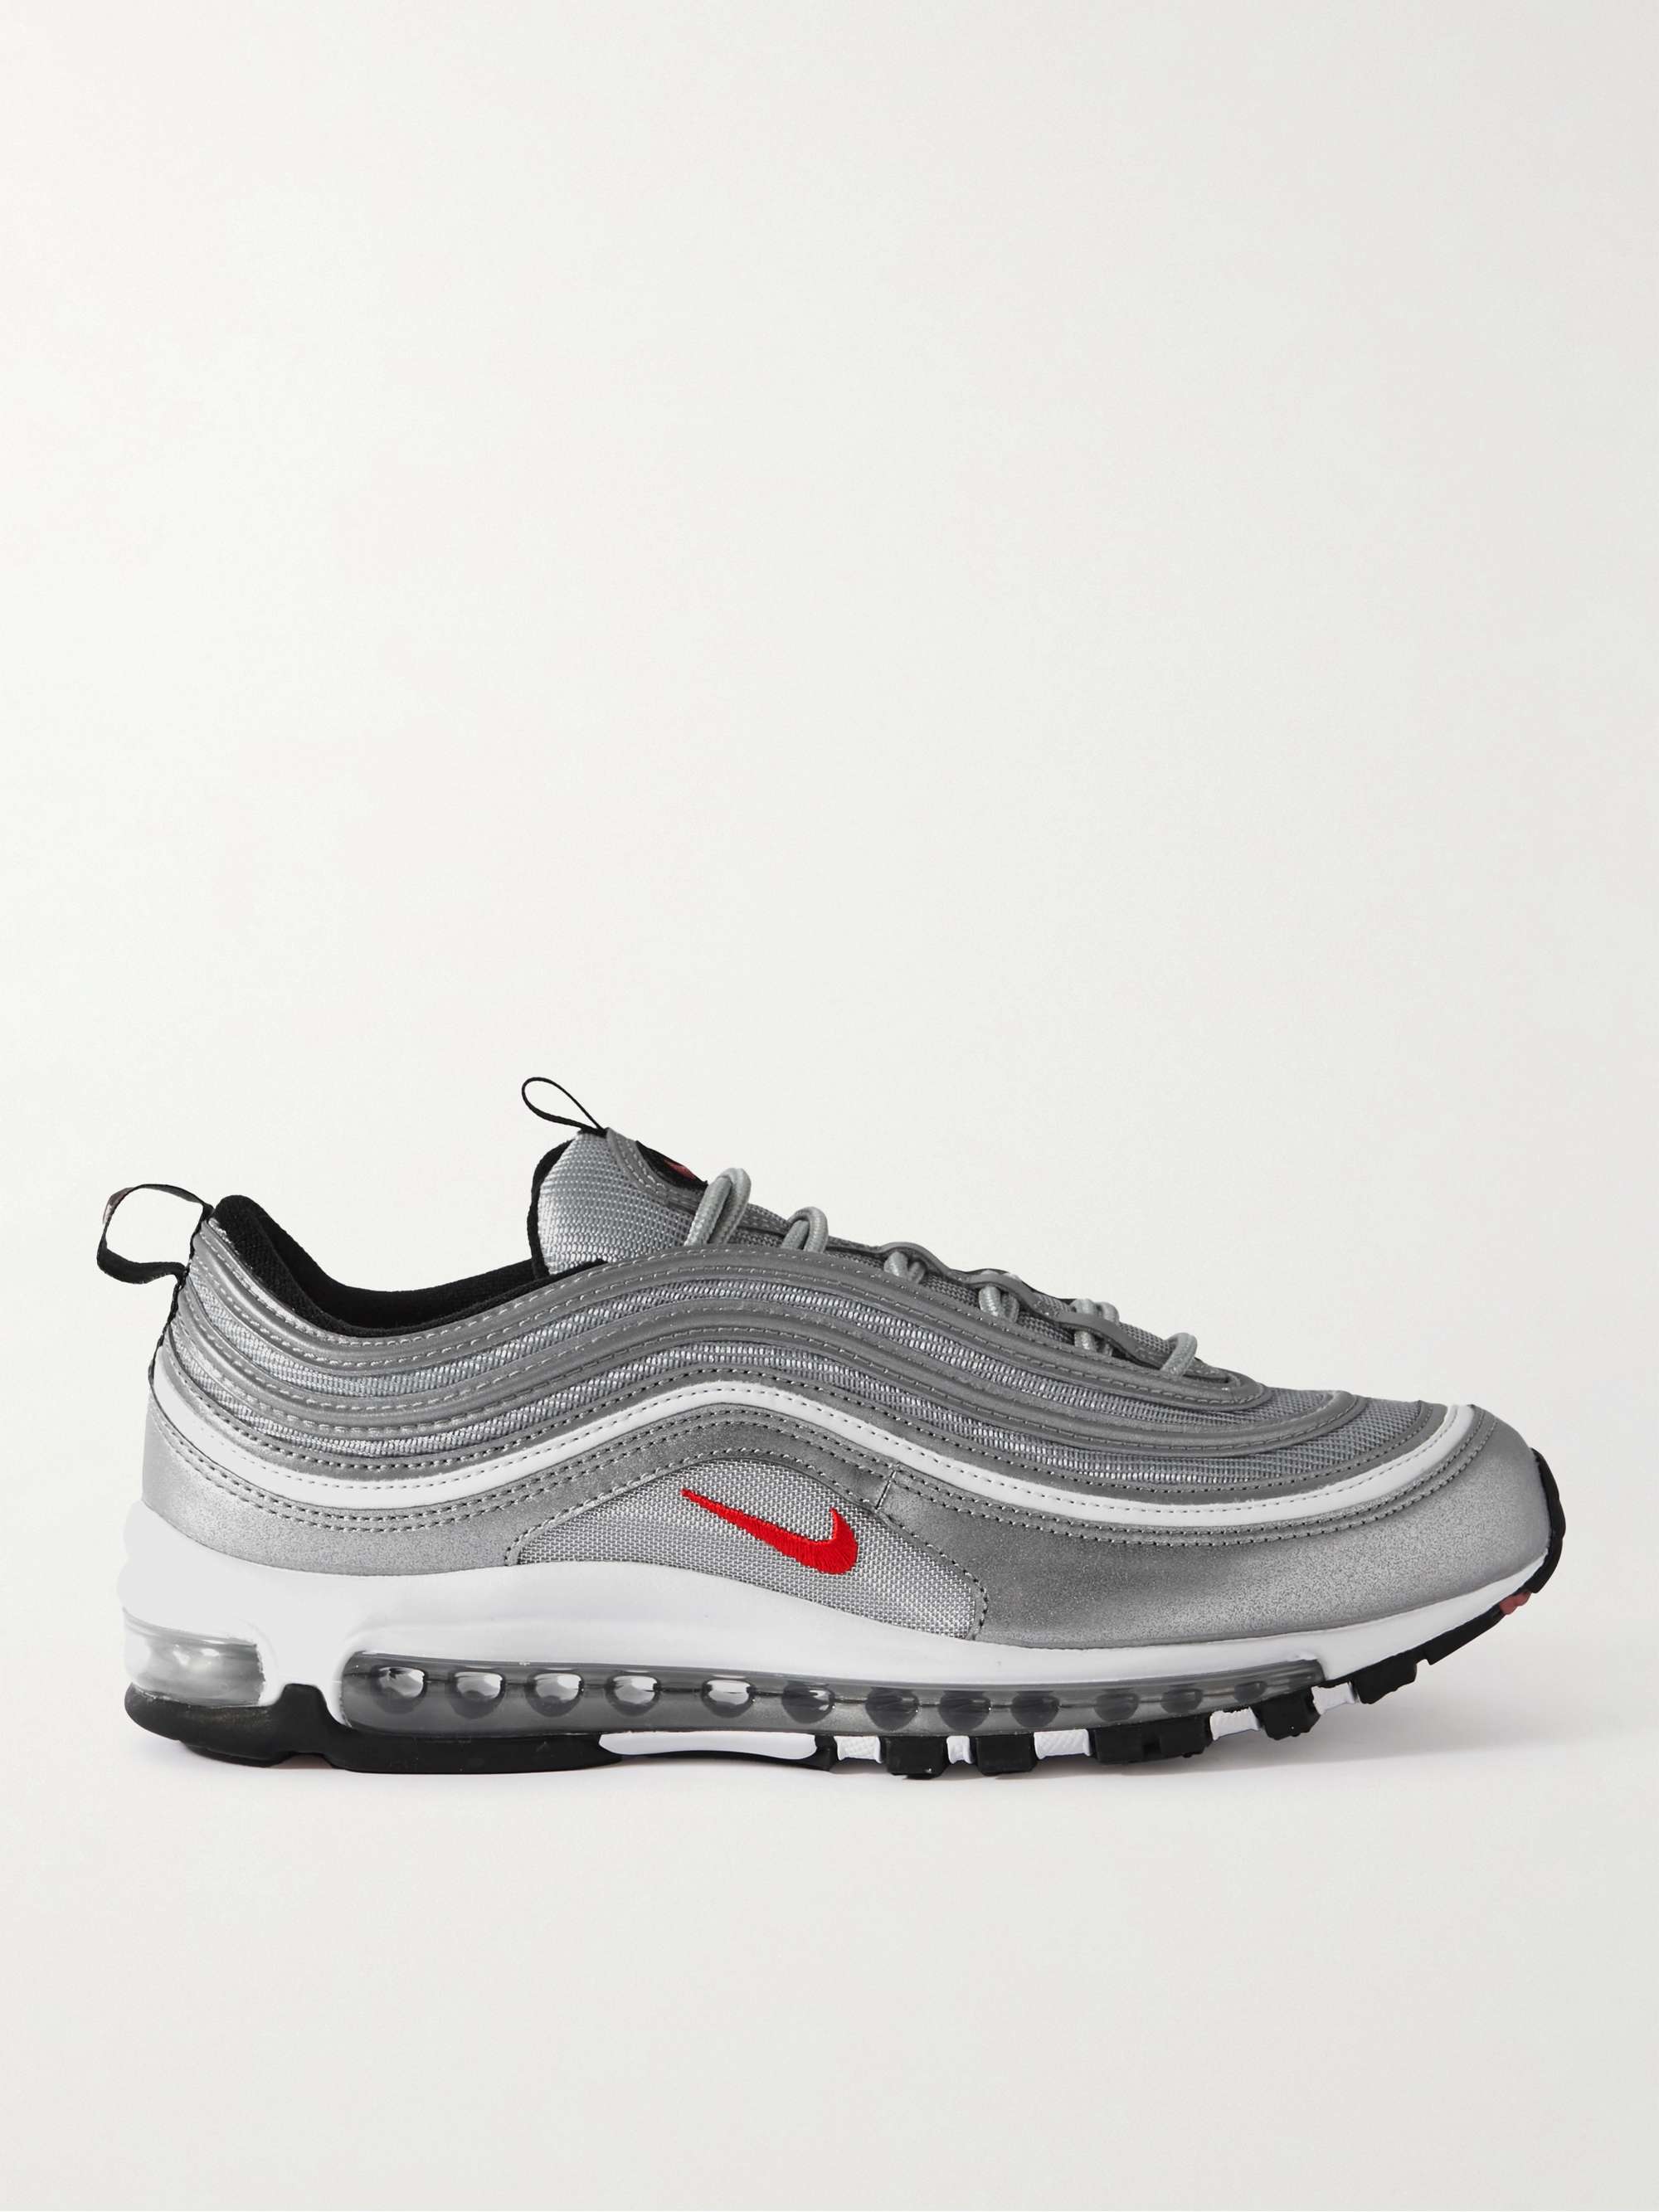 Behalf Asser Auckland Gray Air Max 97 Metallic Leather and Mesh Sneakers | NIKE | MR PORTER